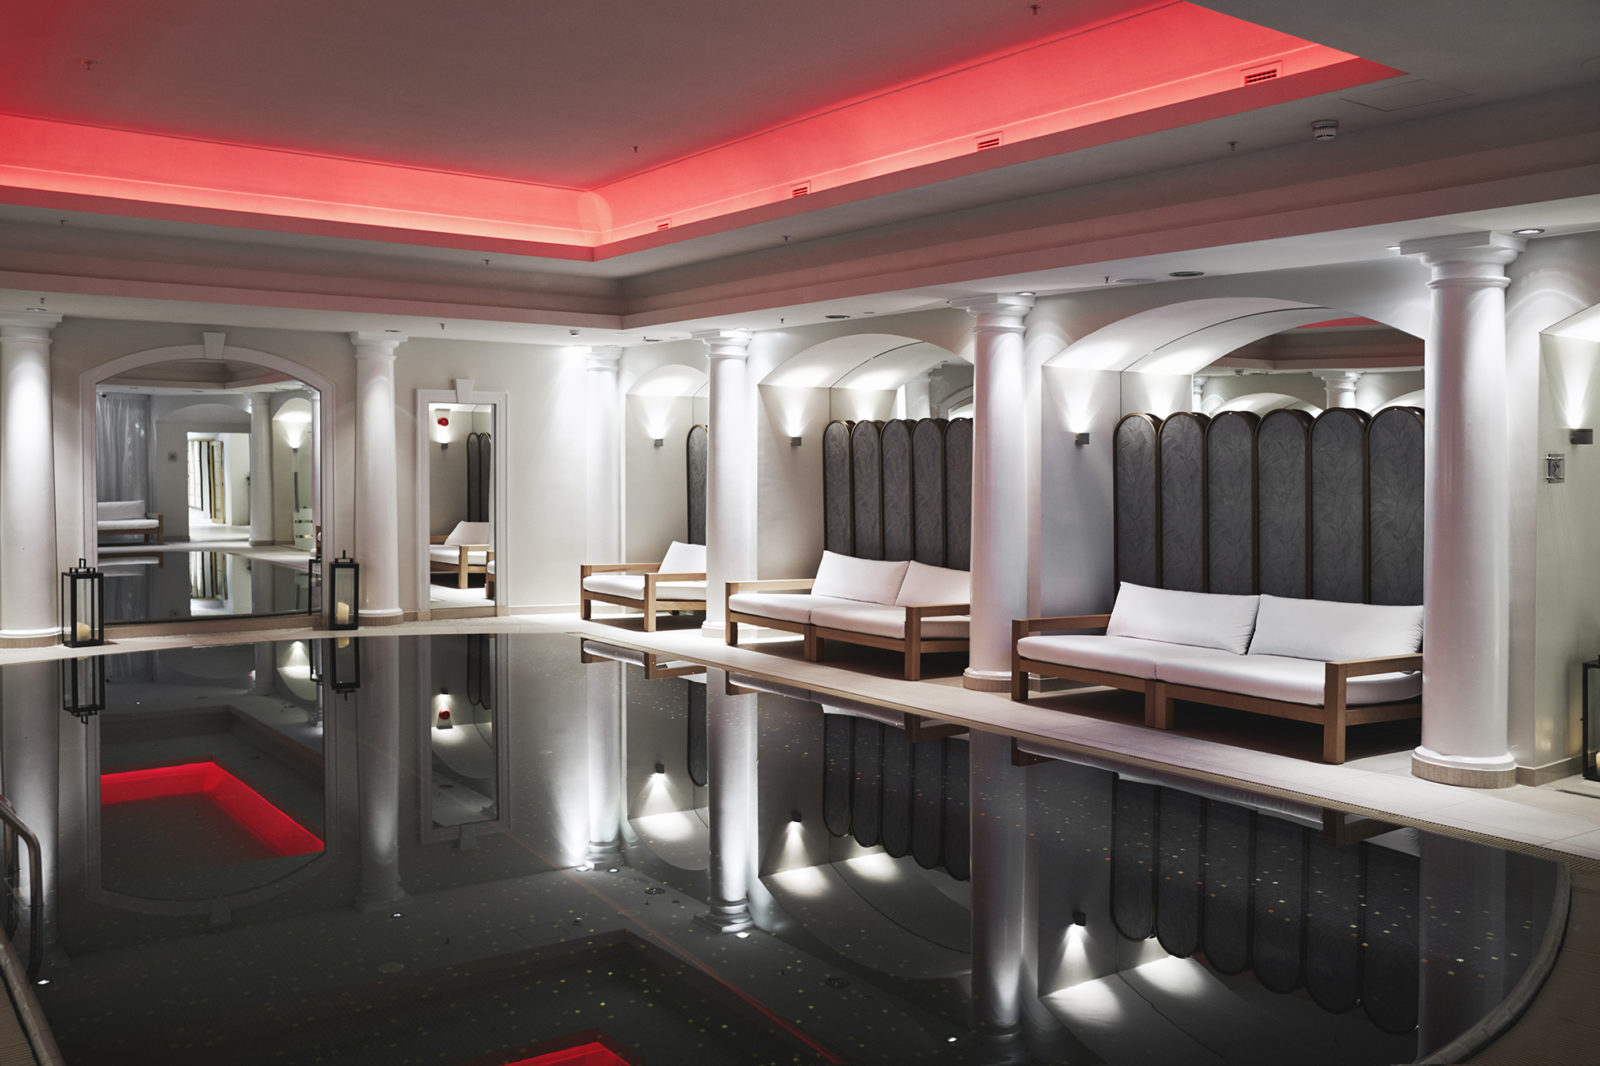 The 12.5m lap pool at Britannia Spa , with the red light setting. Photo by Wil Lee-Wright.